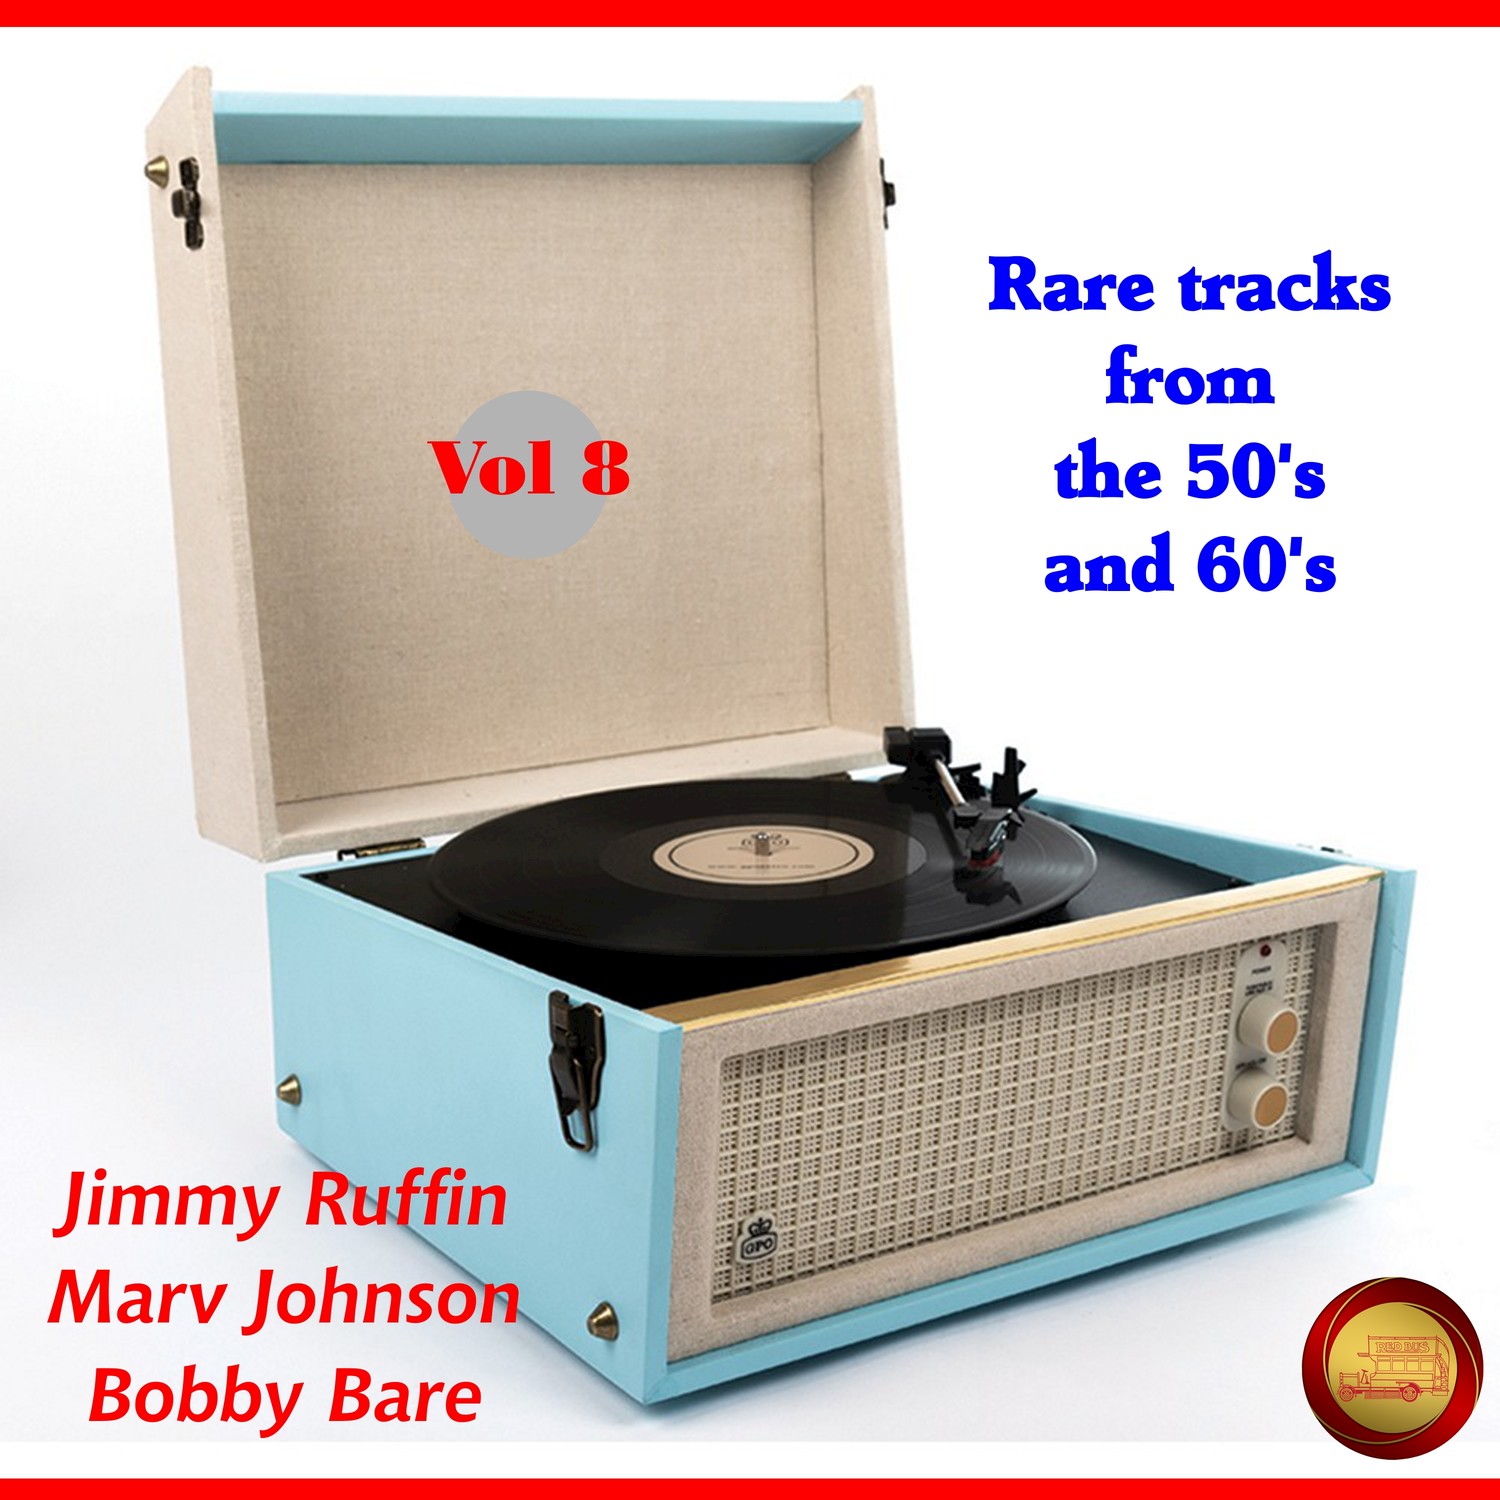 Rare Tracks from the 50's and 60's, Vol. 8